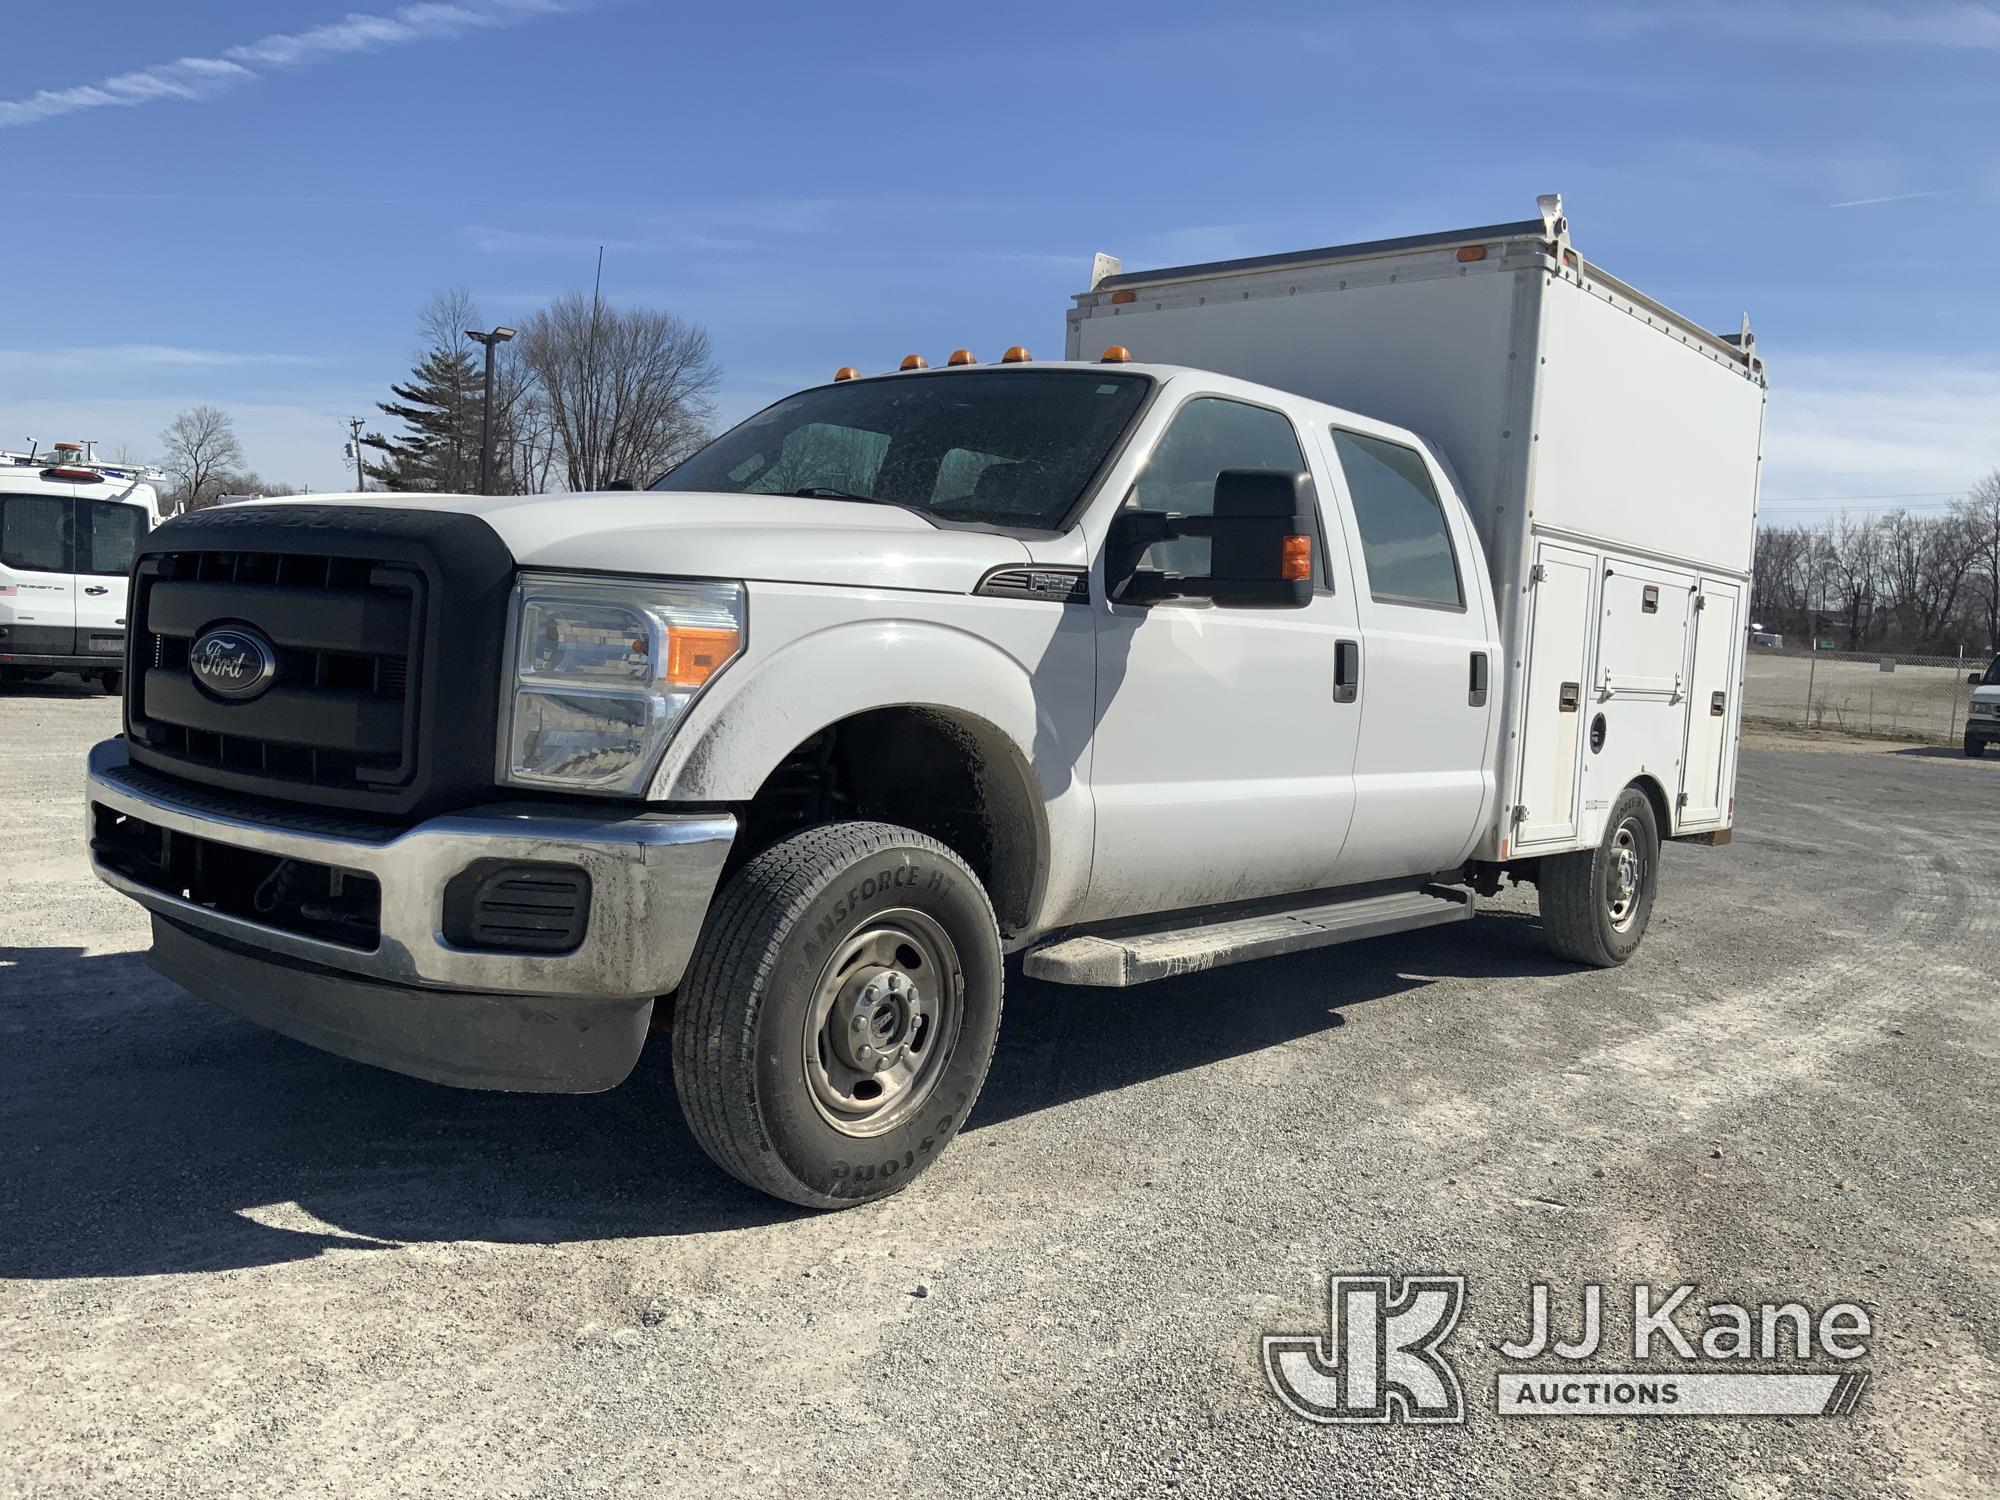 (Hawk Point, MO) 2012 Ford F250 4x4 Enclosed High-Top Service Truck Runs & Moves.